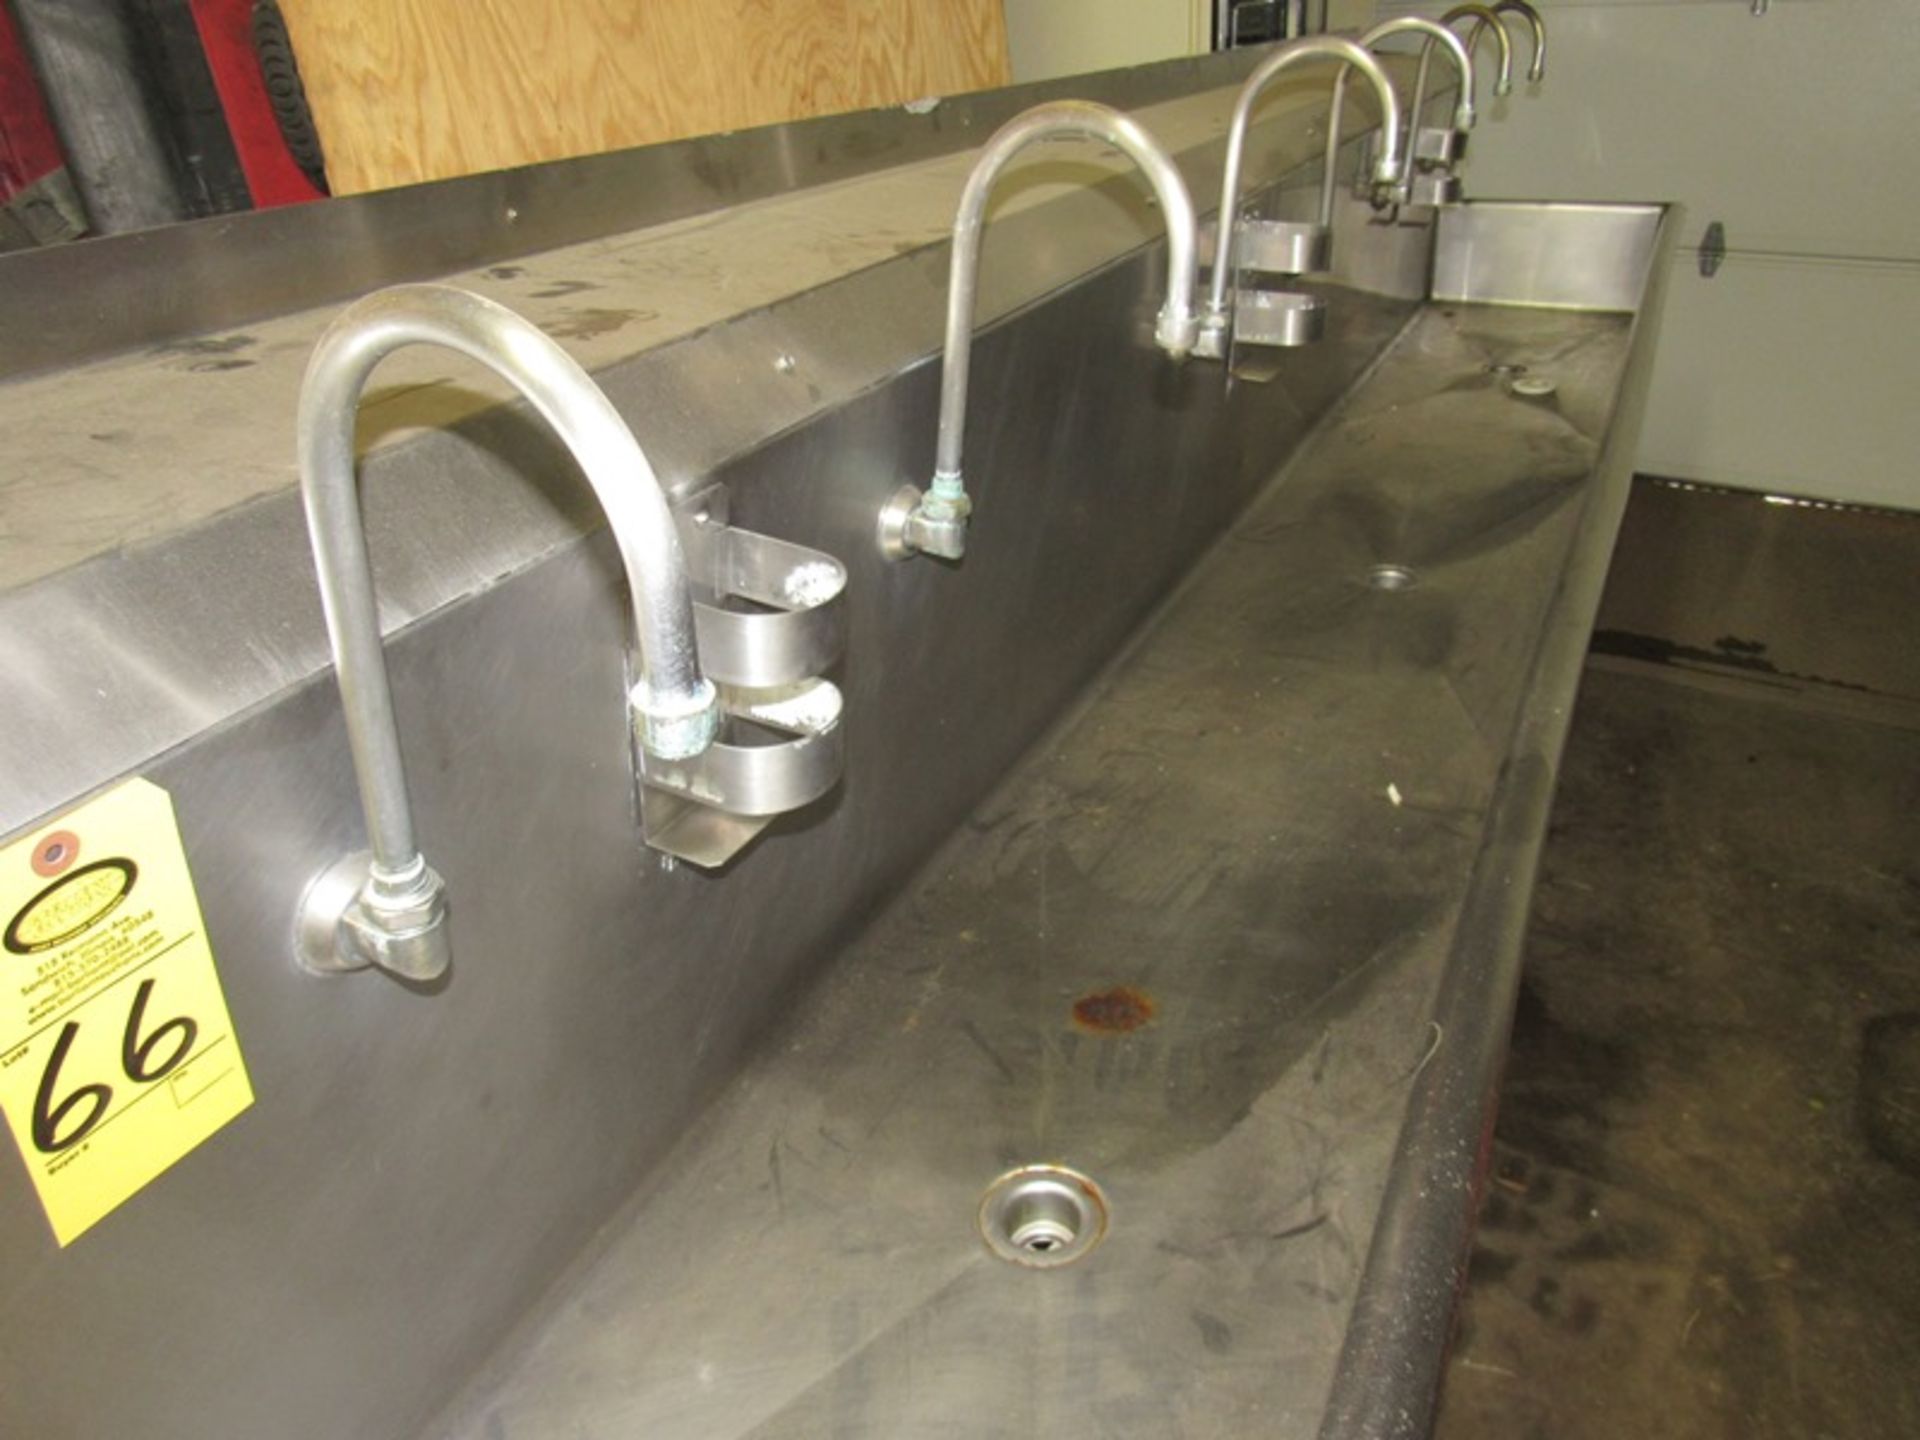 Stainless Steel Sink, 24" W X 10' L, 6 faucets, foot pedal activation, 3 soap holders - Image 2 of 4